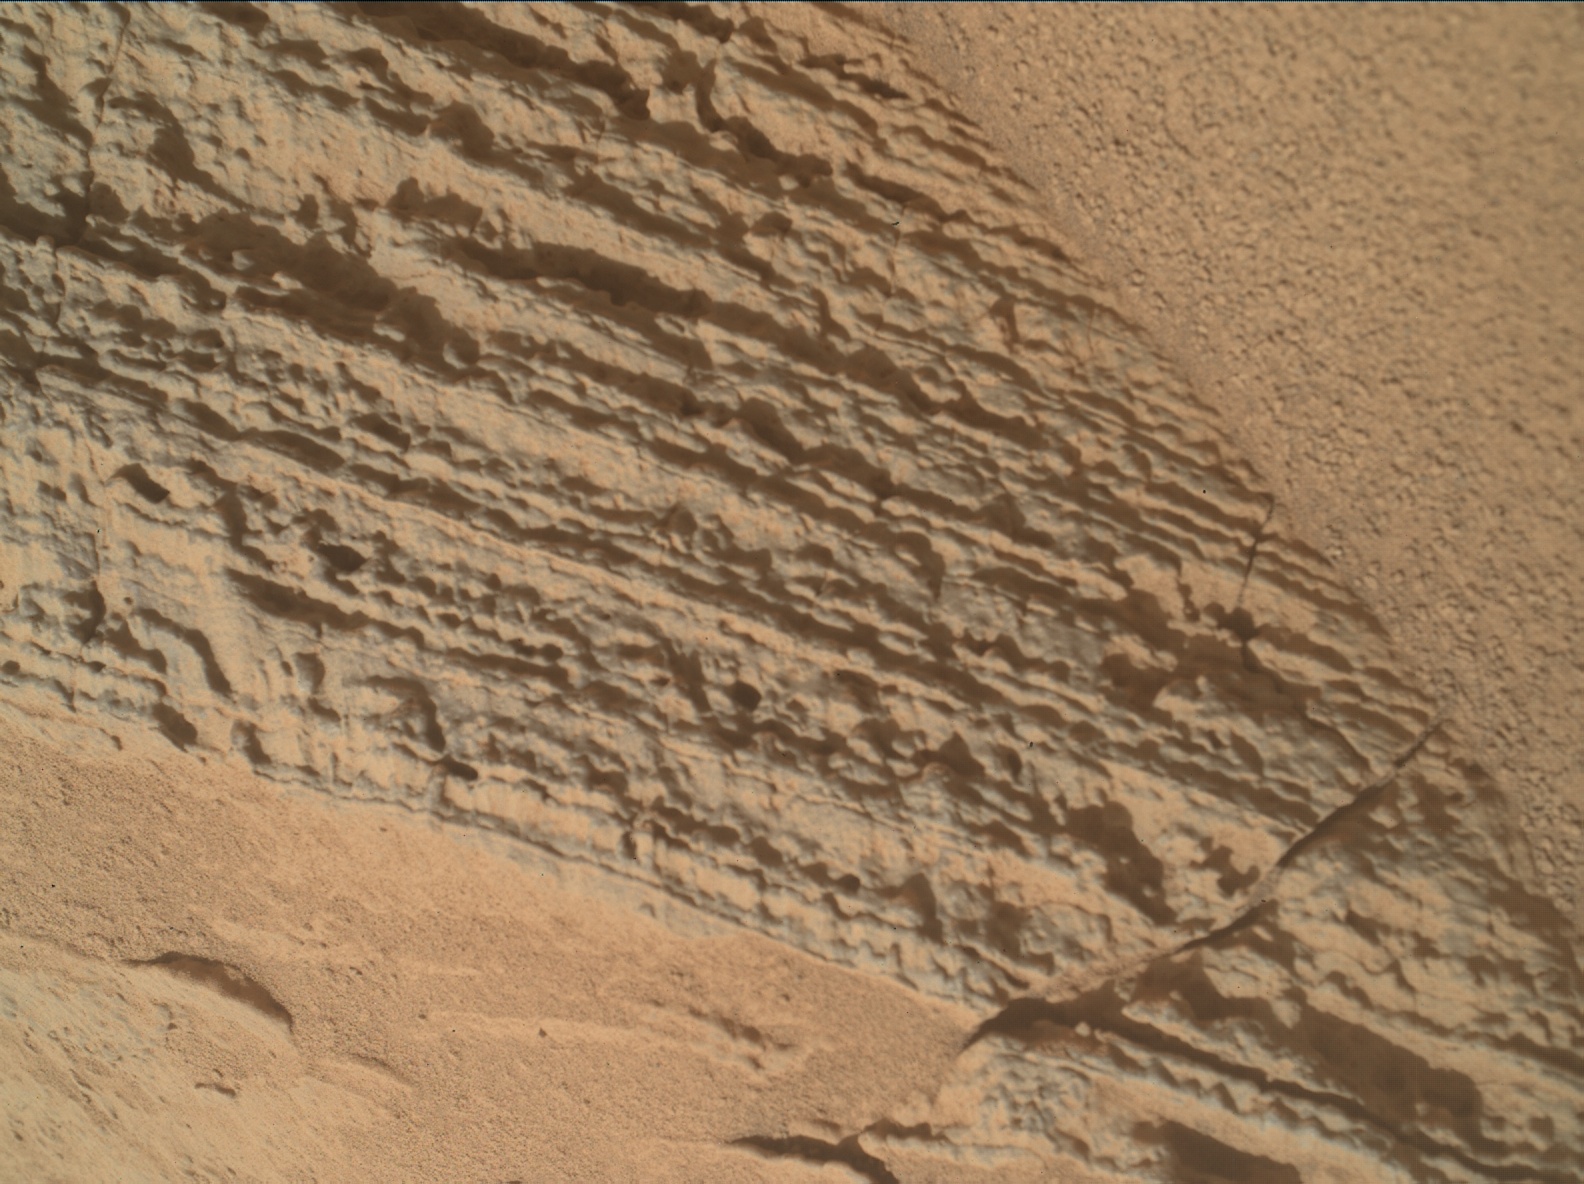 Nasa's Mars rover Curiosity acquired this image using its Mars Hand Lens Imager (MAHLI) on Sol 3688